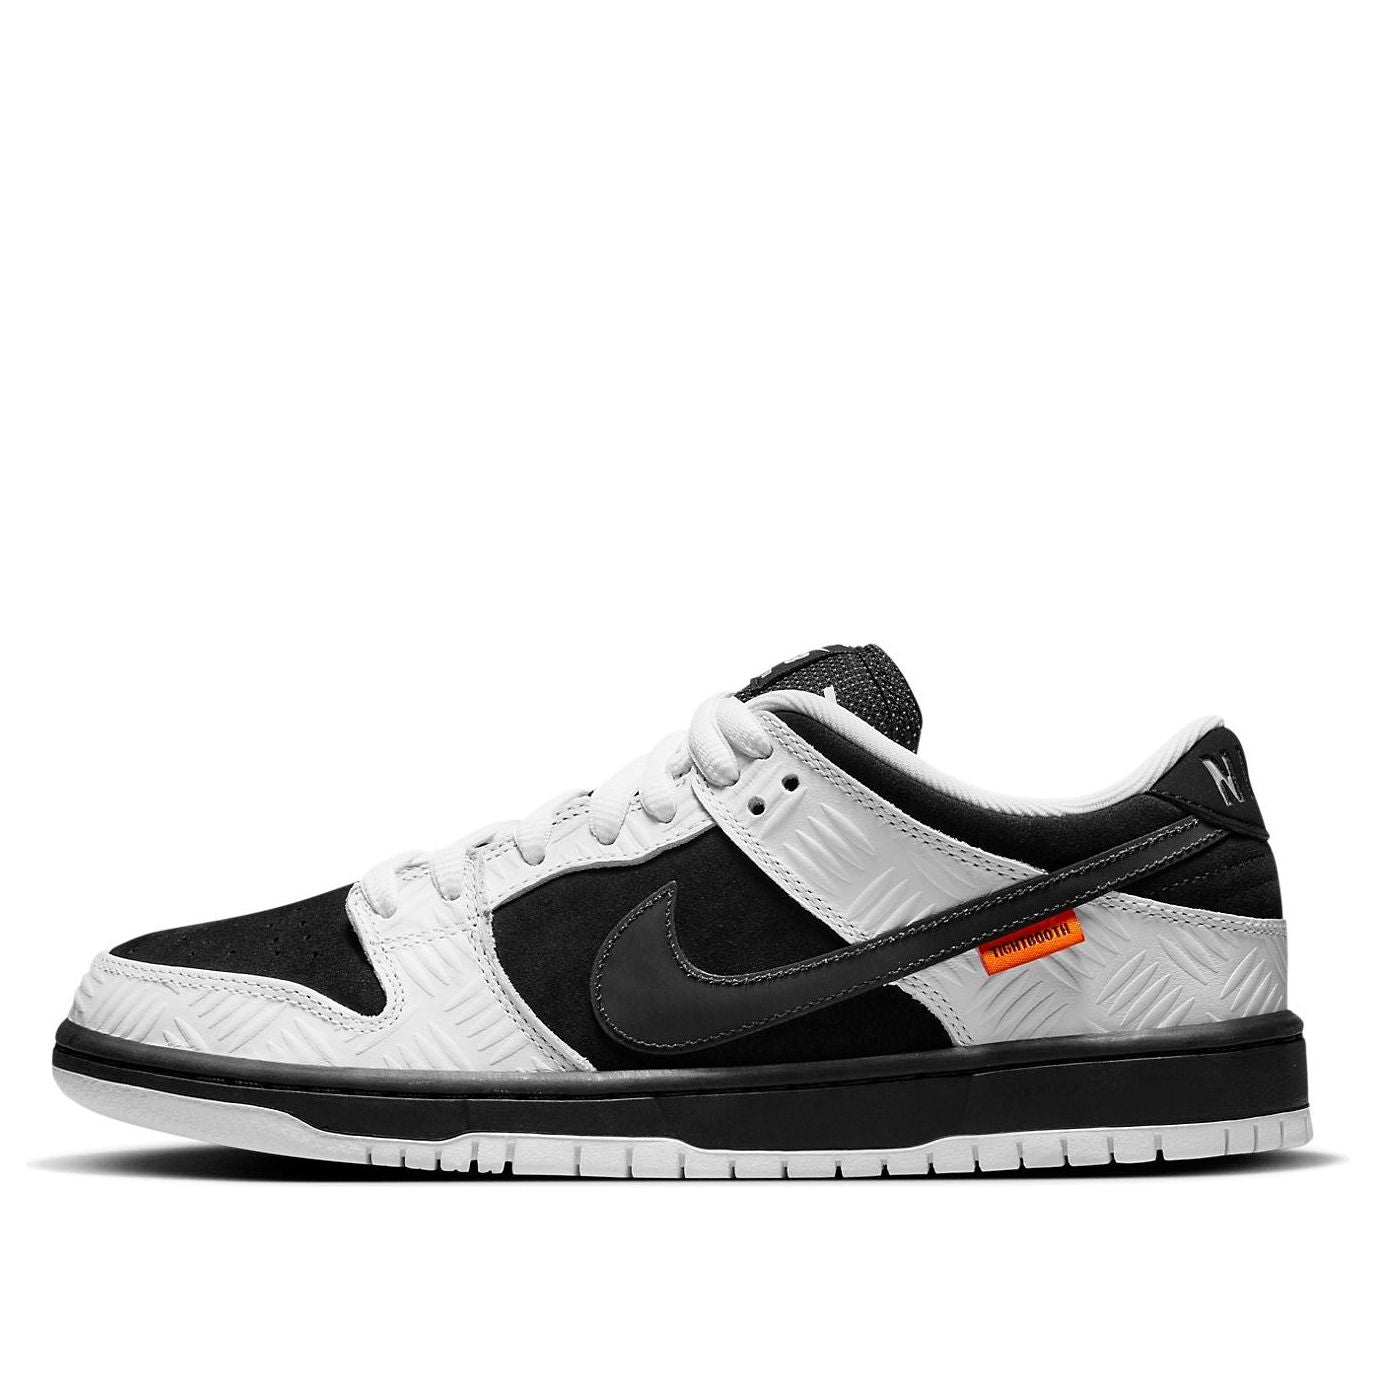 Nike SB Dunk Low x TIGHTBOOTH 'White Black' FD2629-100 Classic Sneakers